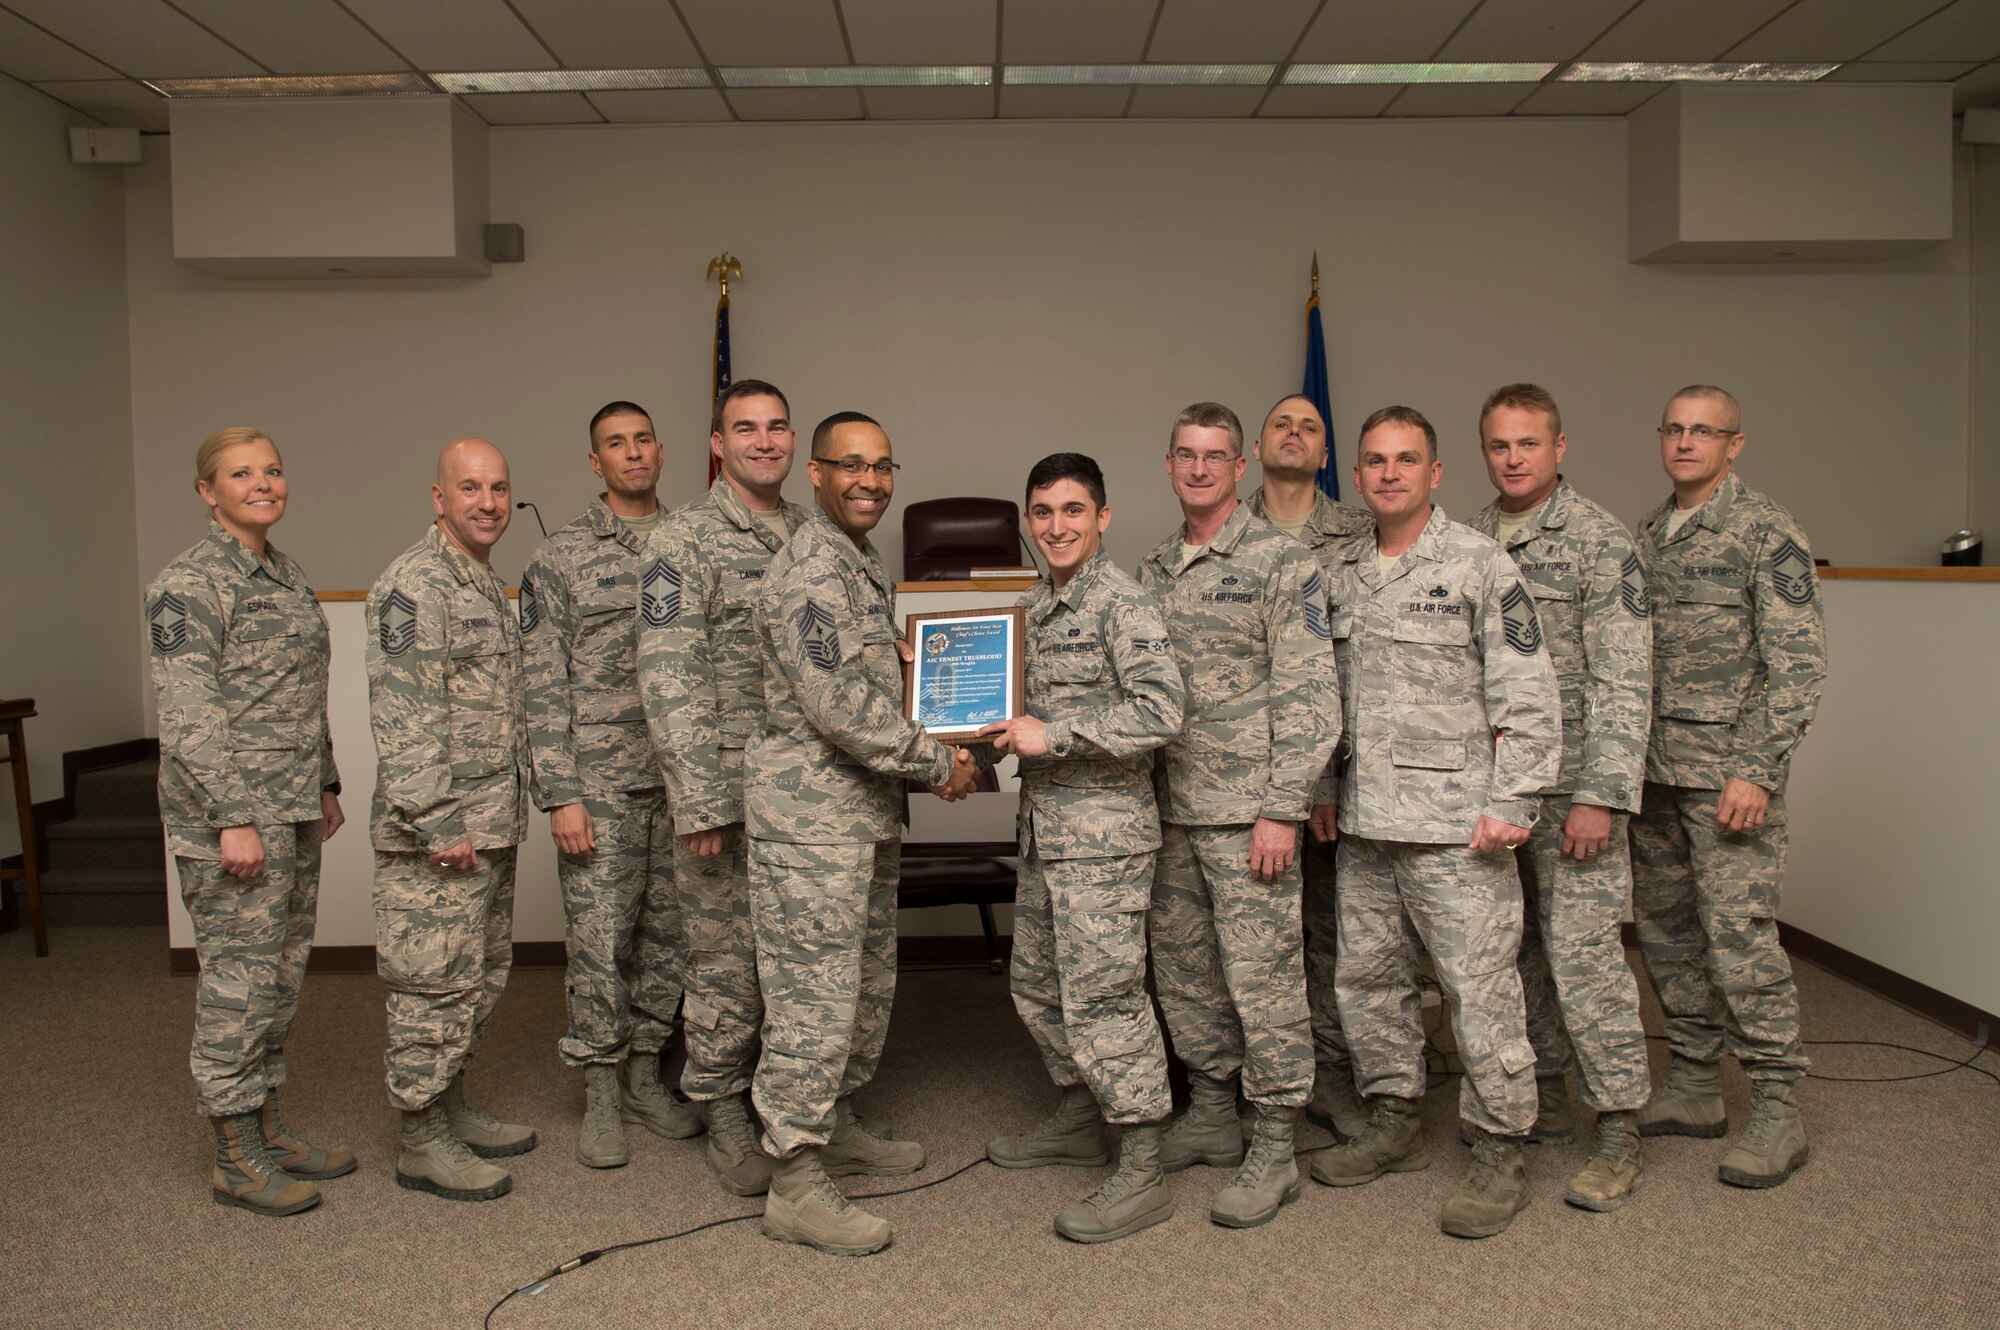 Airman 1st Class Ernest Trueblood, a 49th Wing Judge Advocate paralegal, receives the January Chief’s Choice Award, from Chief Master Sgt. Barrington Bartlett, the 49th Wing command chief Jan. 19, 2017, at Holloman Air Force Base, N.M. (U.S. Air Force photo by Tech. Sgt. Amanda Junk)